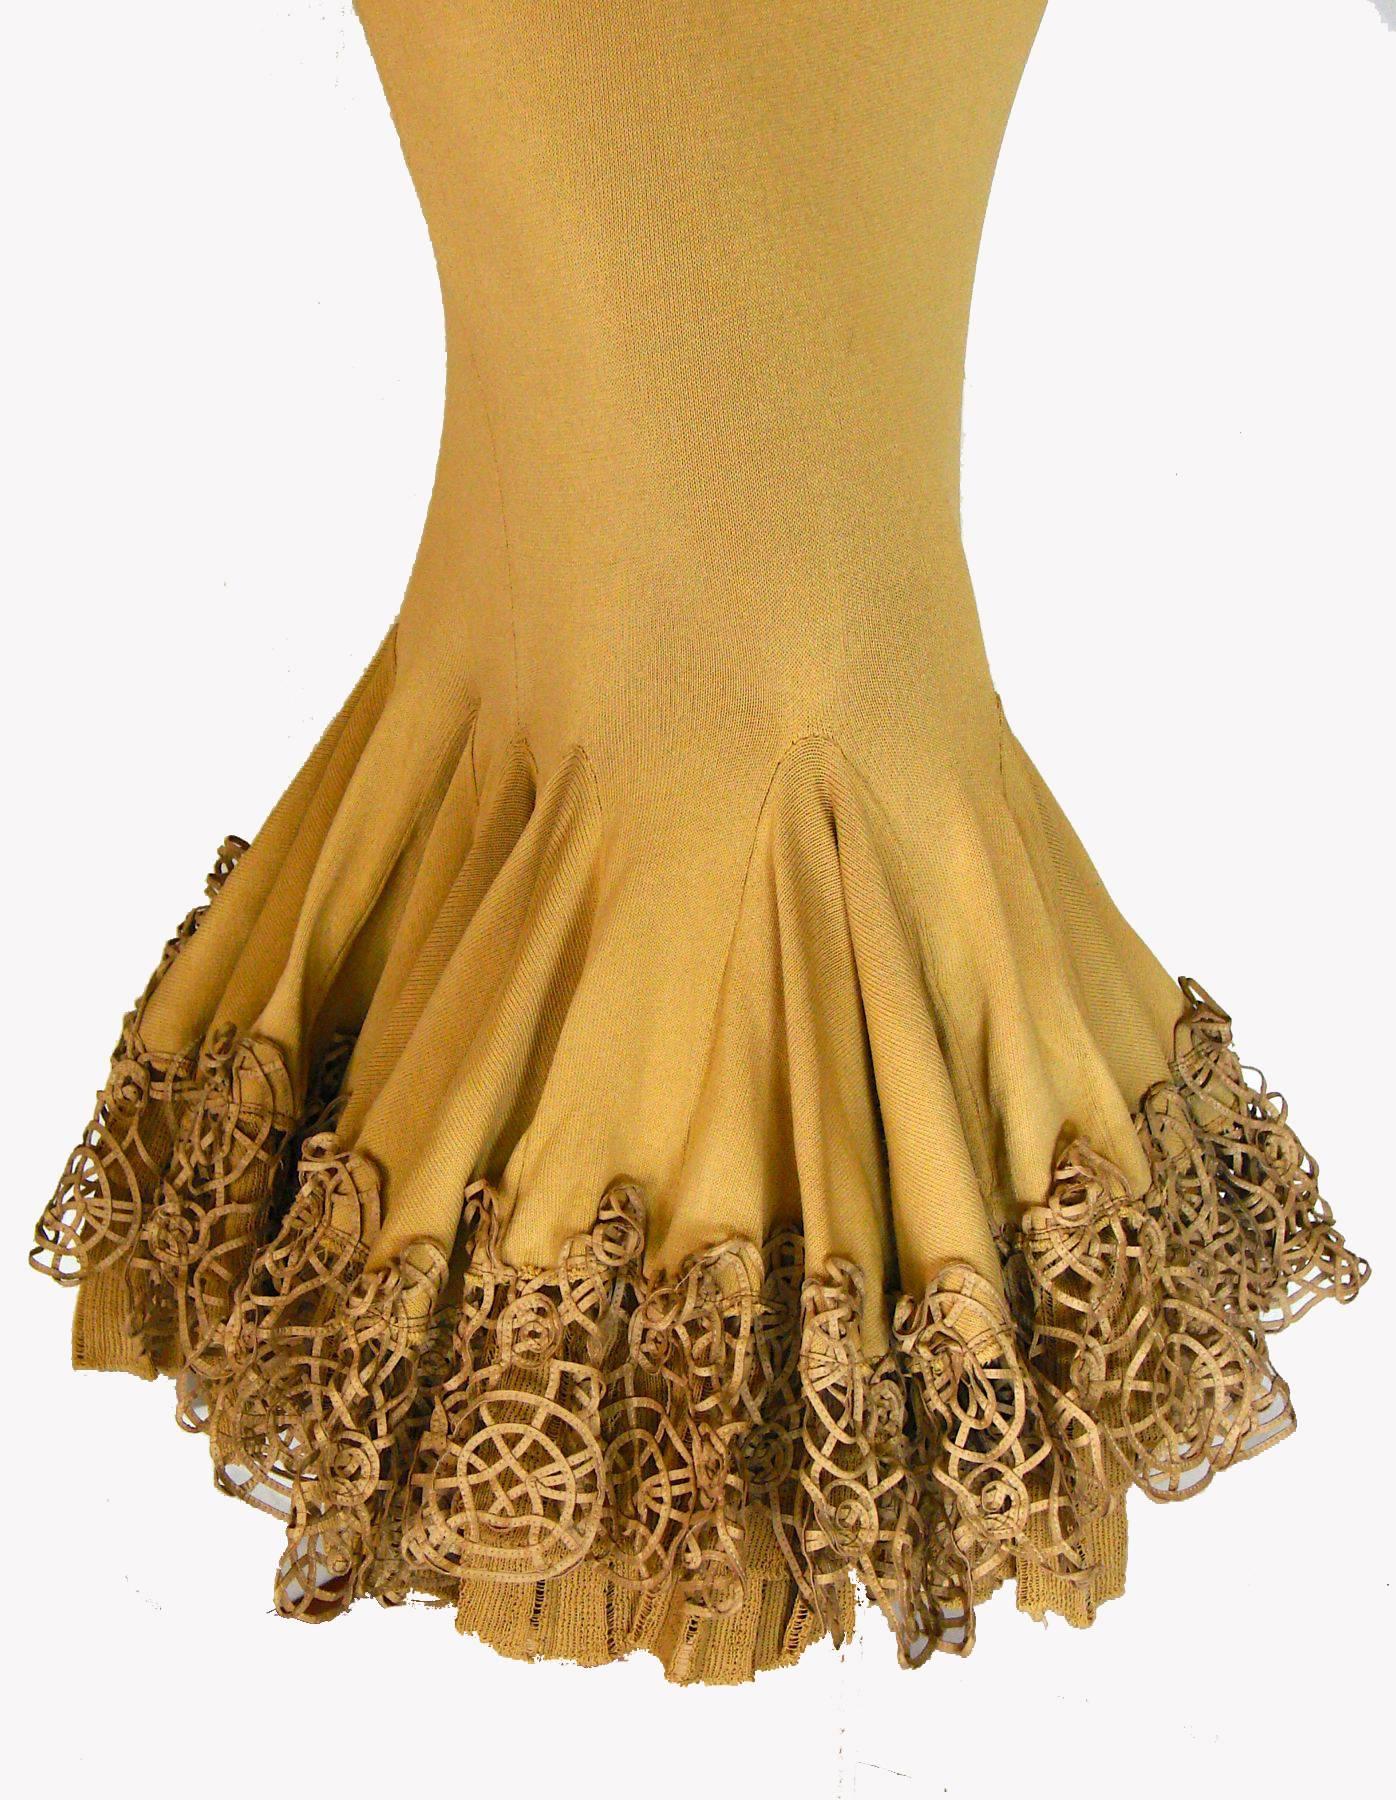 Roberto Cavalli Mermaid Dress Gown with Leather Ruffle Hem 1990s Size S 3